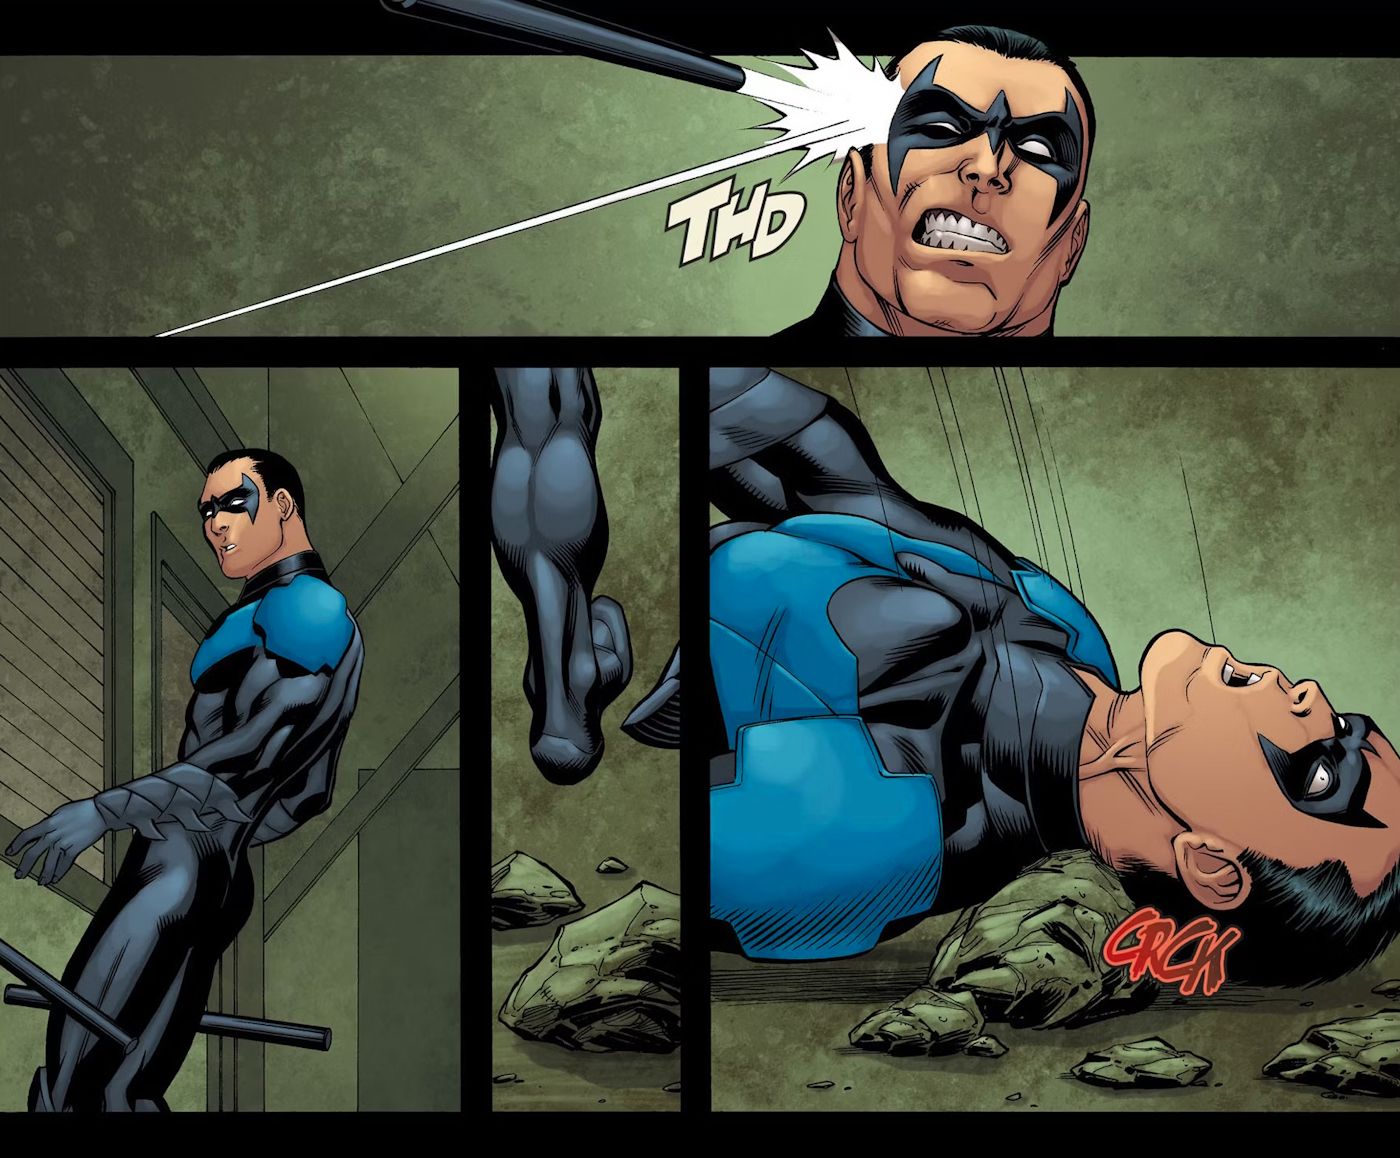 Nightwing Death in Injustice Comics